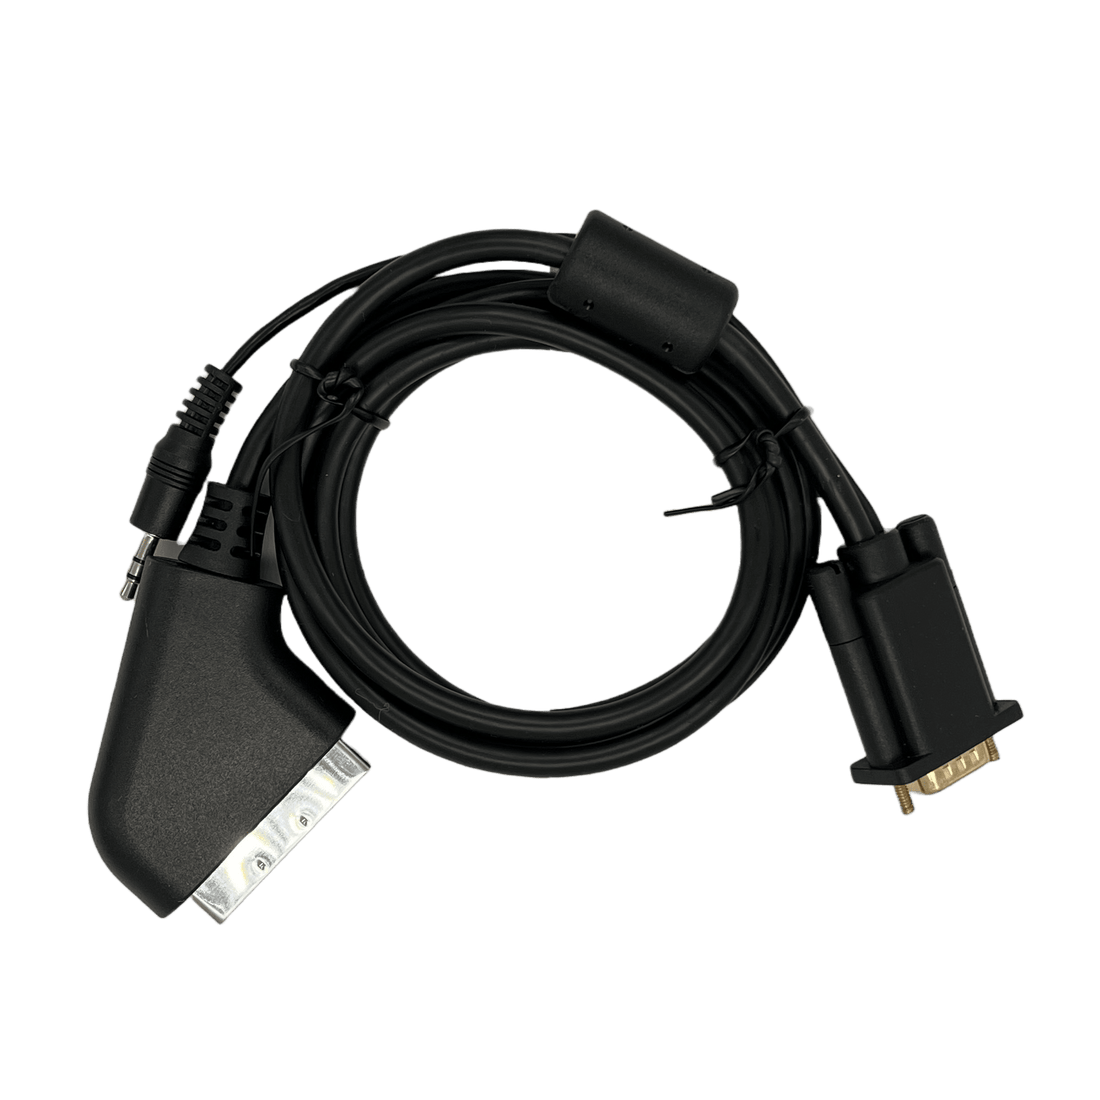 VGA to SCART Premium Video Cable – MiSTer Addons